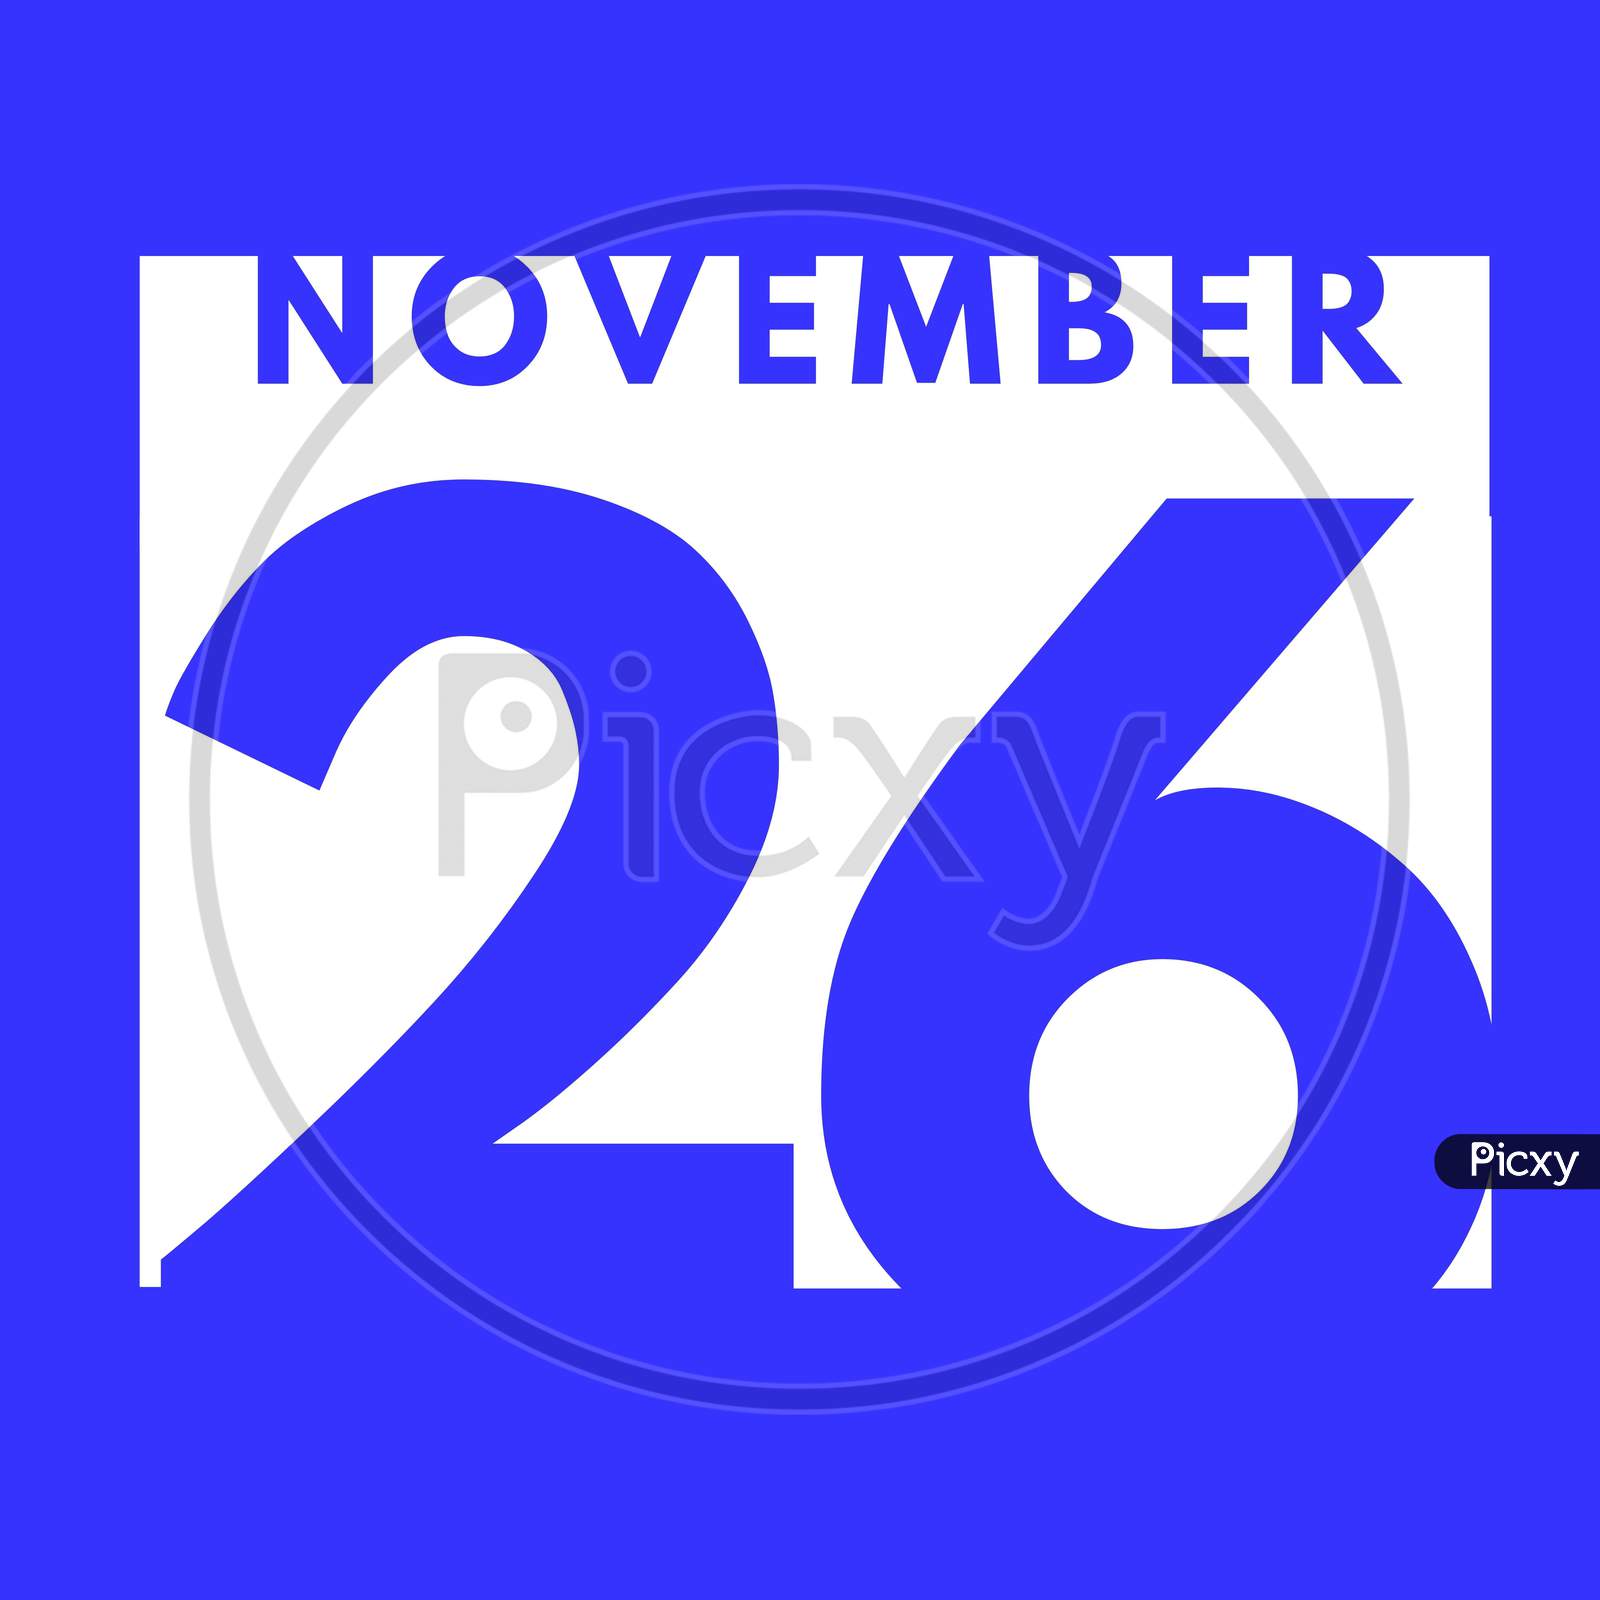 November 26 . Flat Modern Daily Calendar Icon .Date ,Day, Month .Calendar For The Month Of November